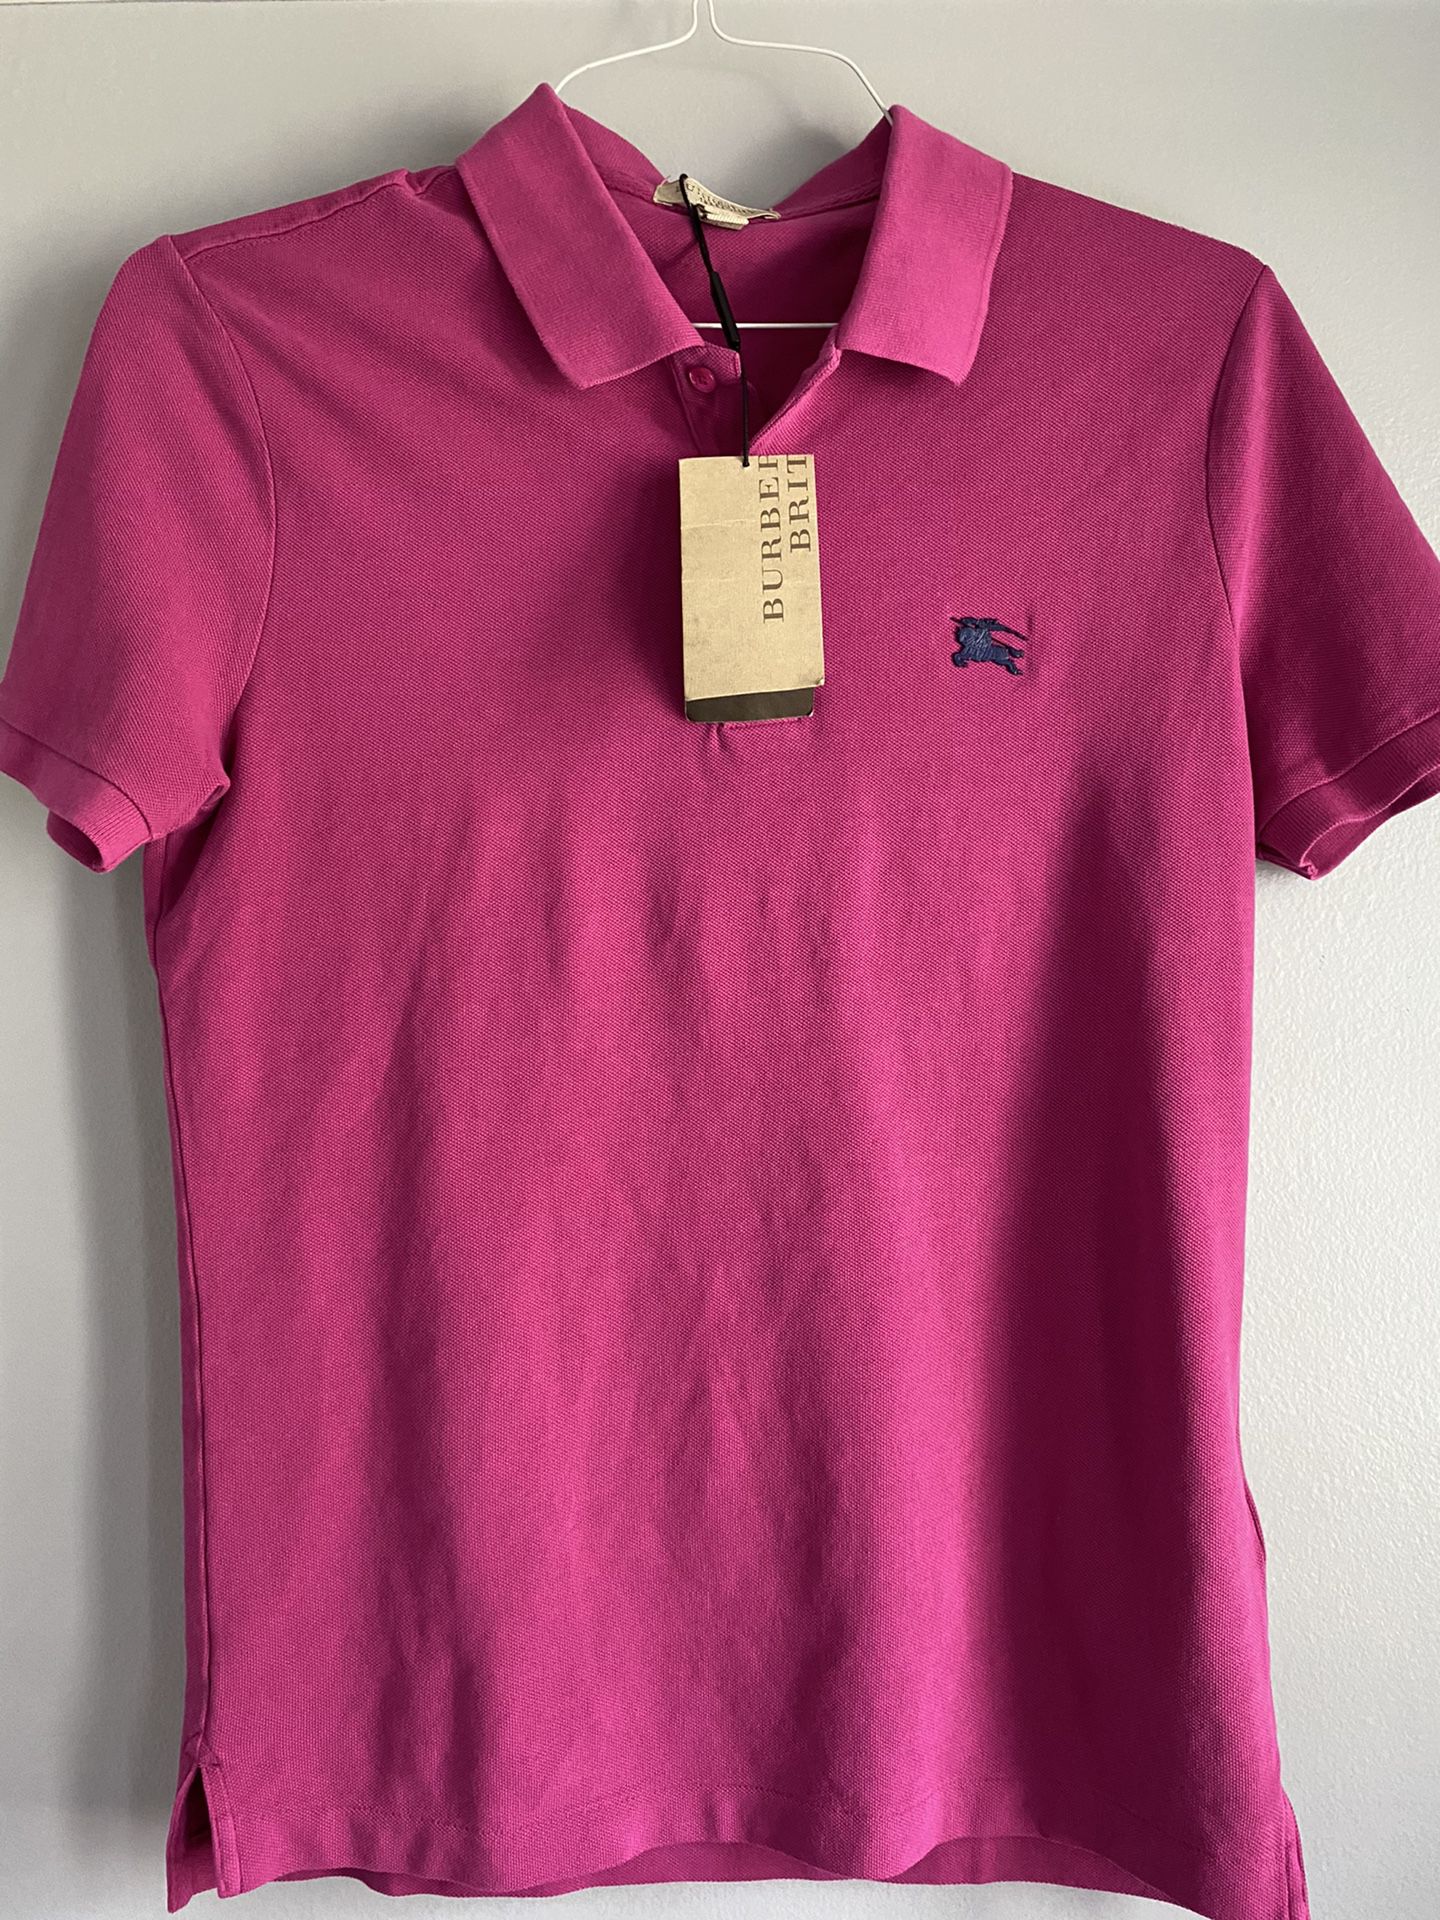 Burberry men’s pink polo small